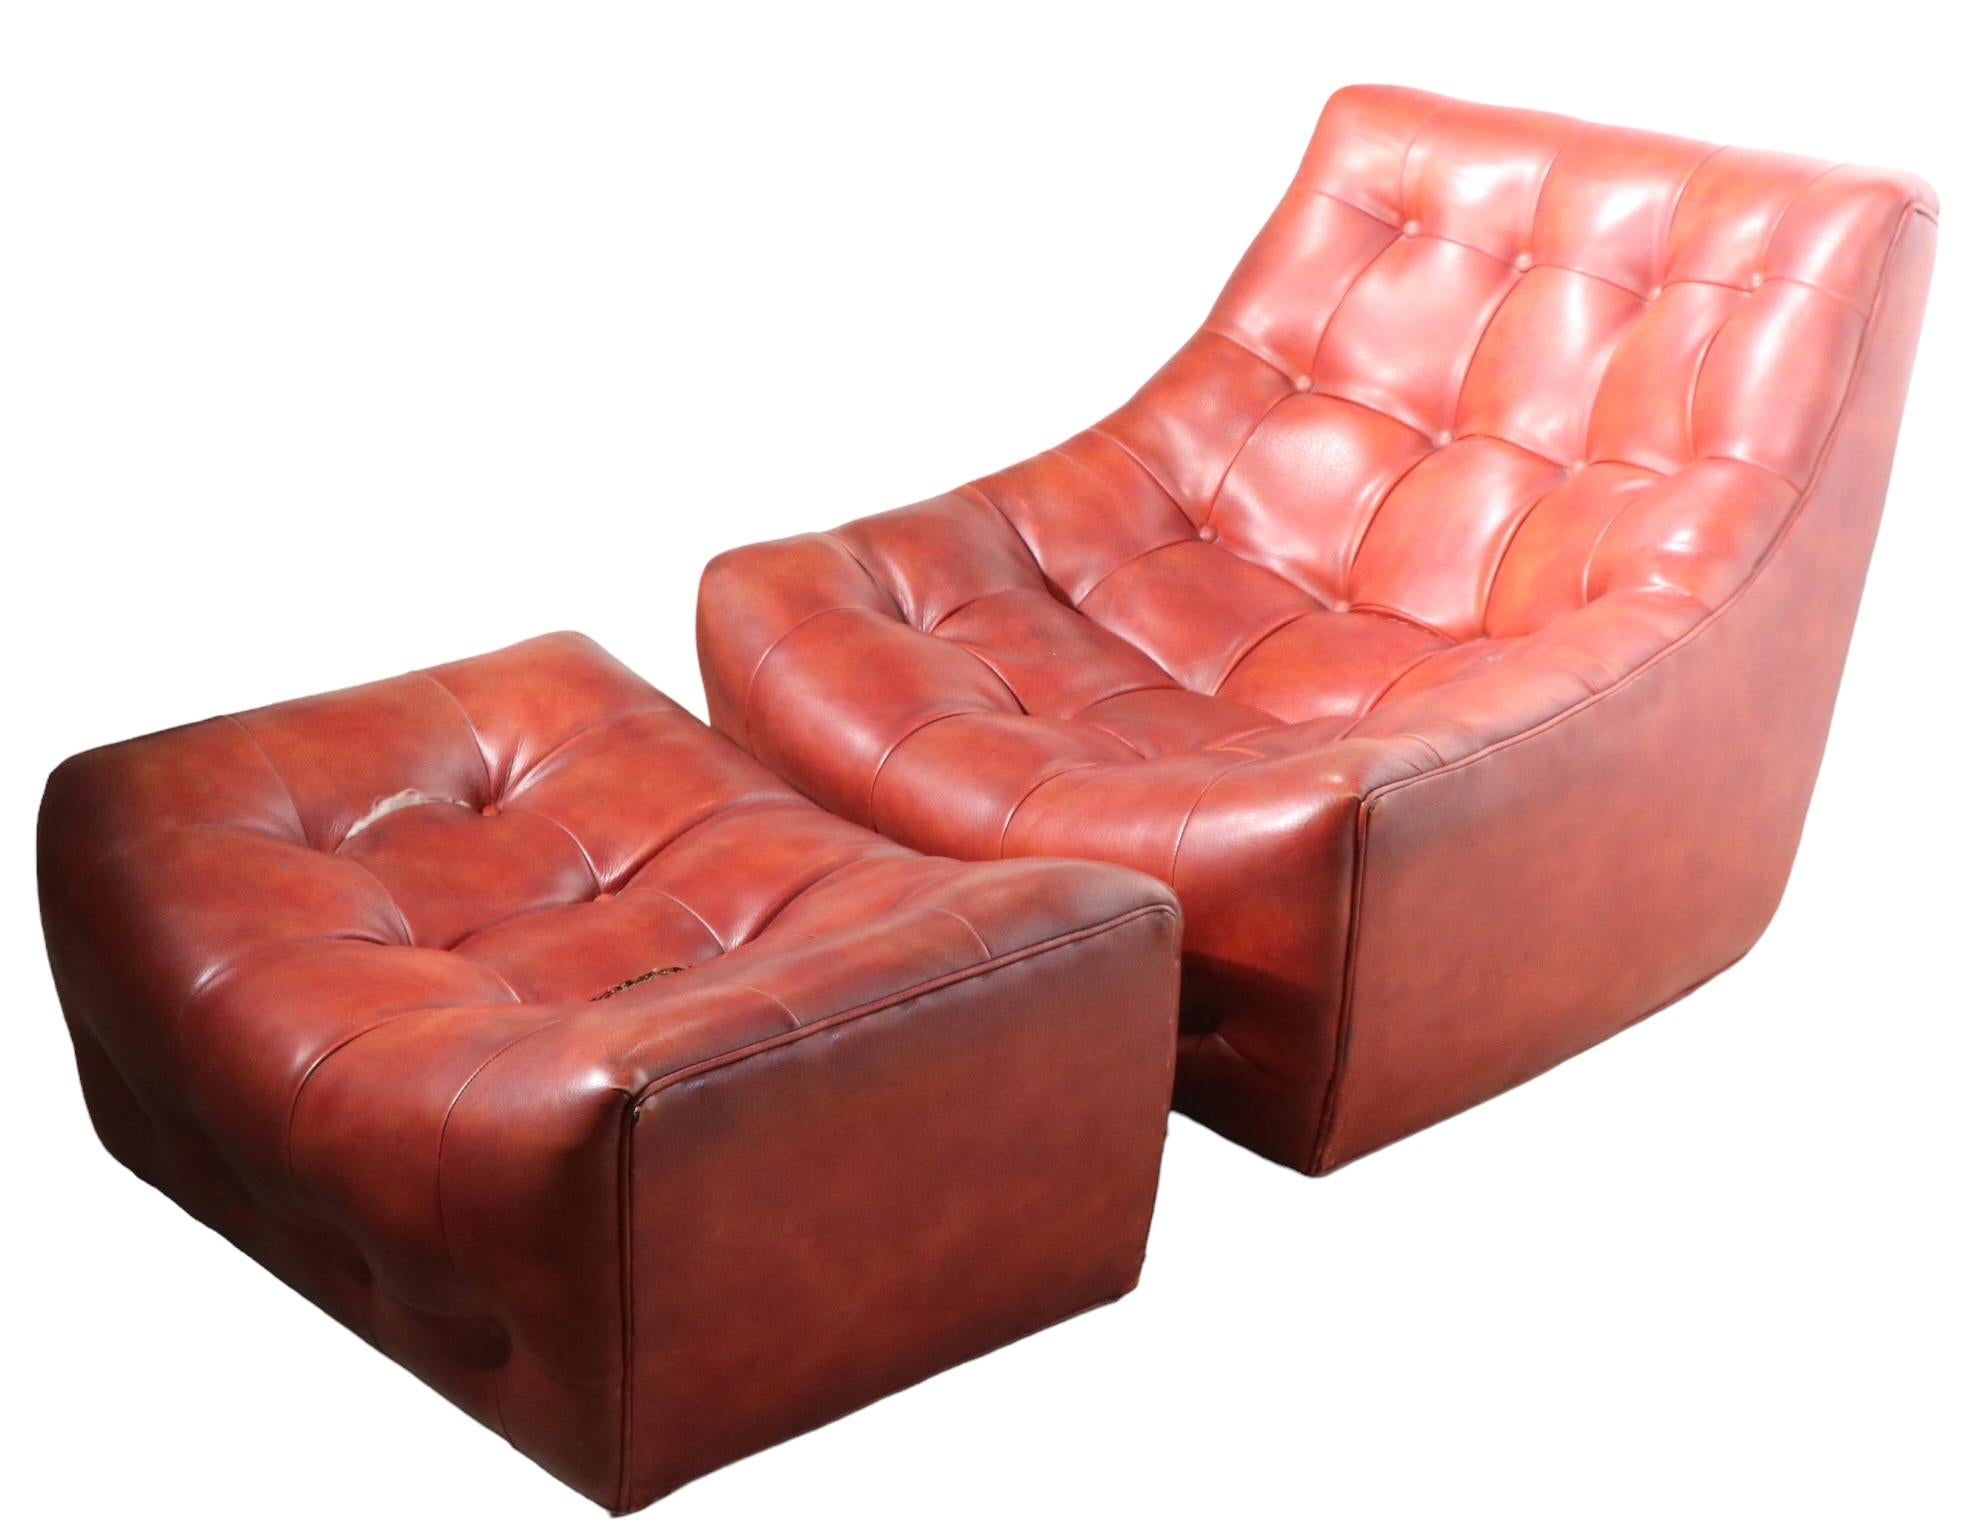 Mid-Century Modern Lounge Chair and Ottoman by Milo Baughman for Thayer Coggin circa 1970s For Sale